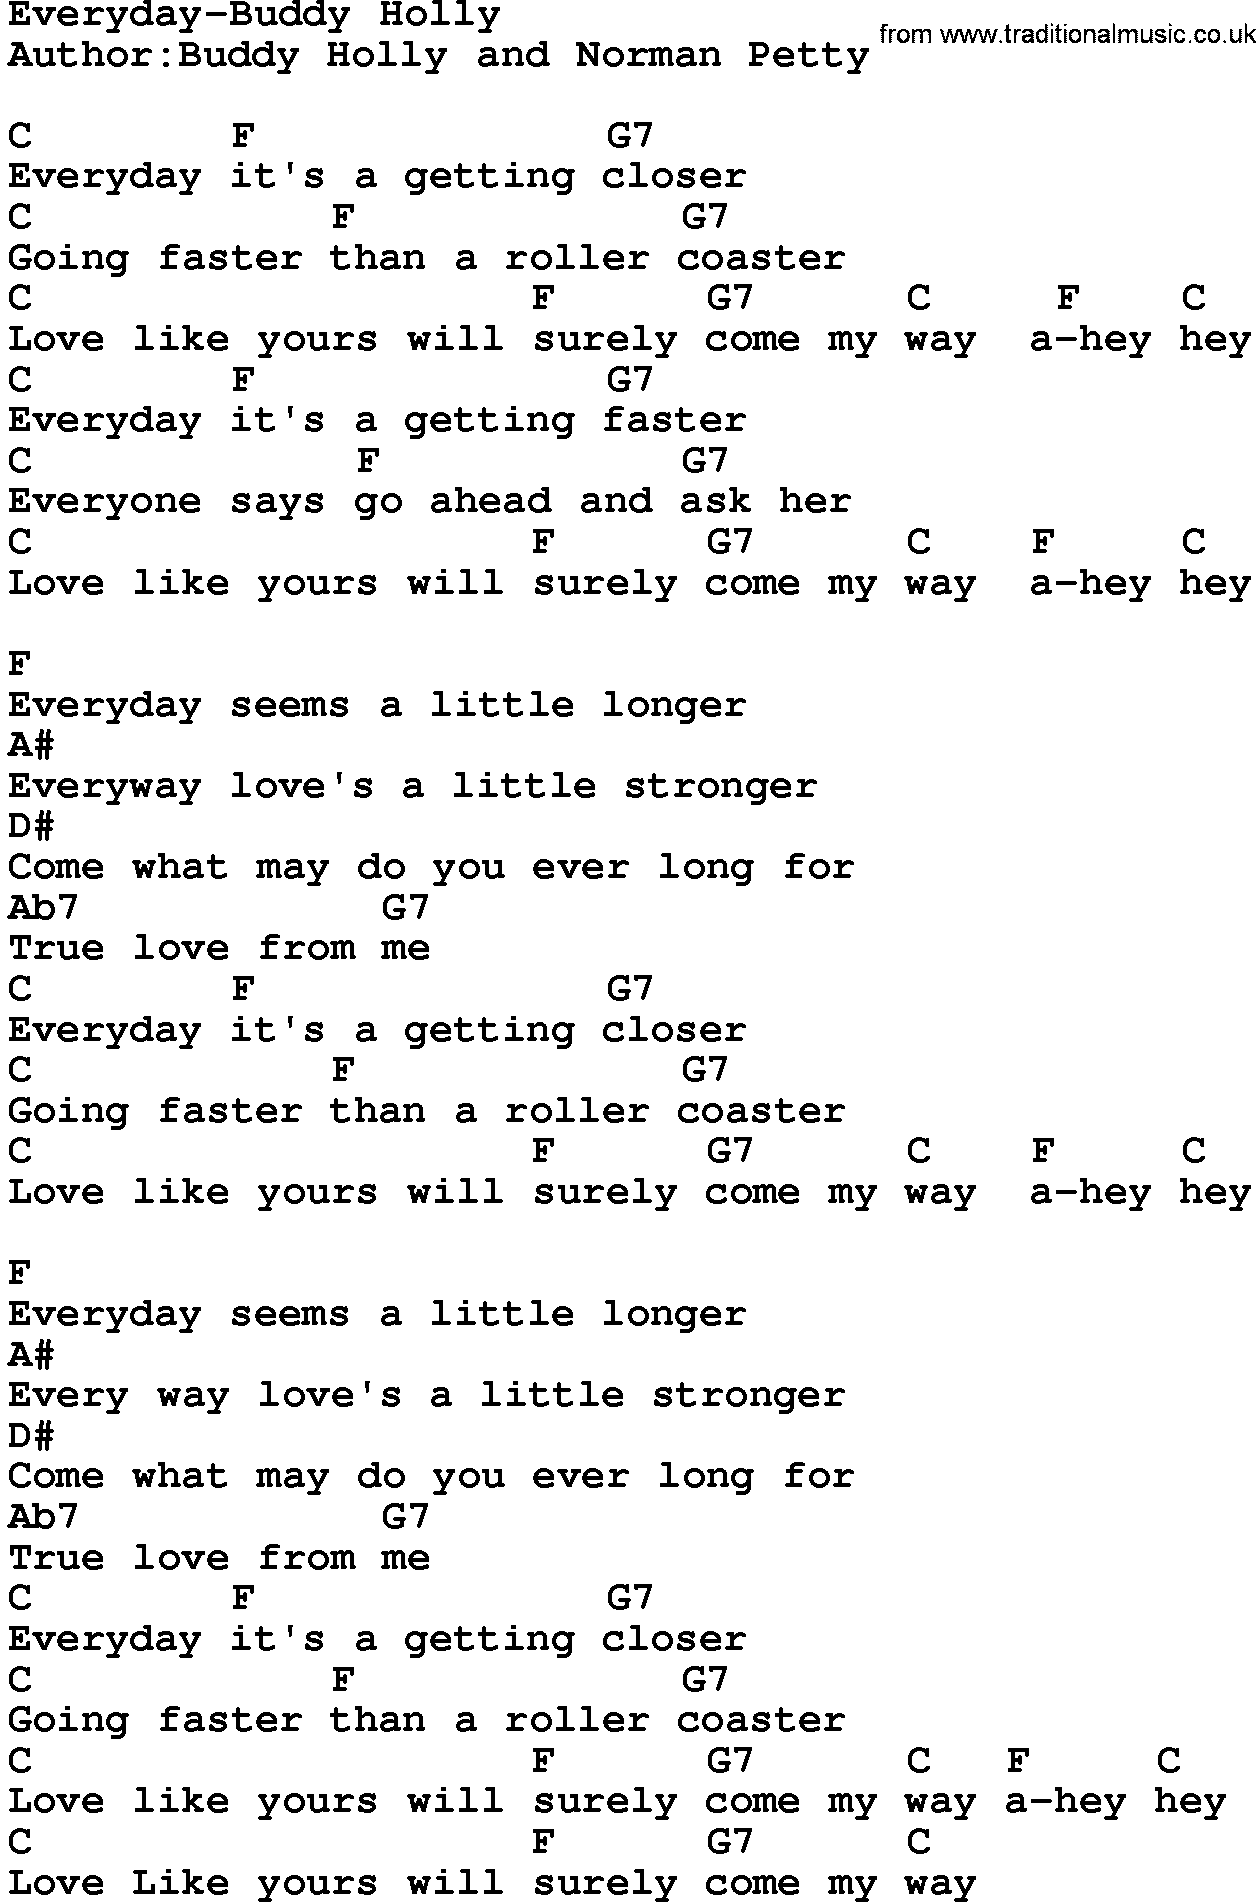 Country music song: Everyday-Buddy Holly lyrics and chords